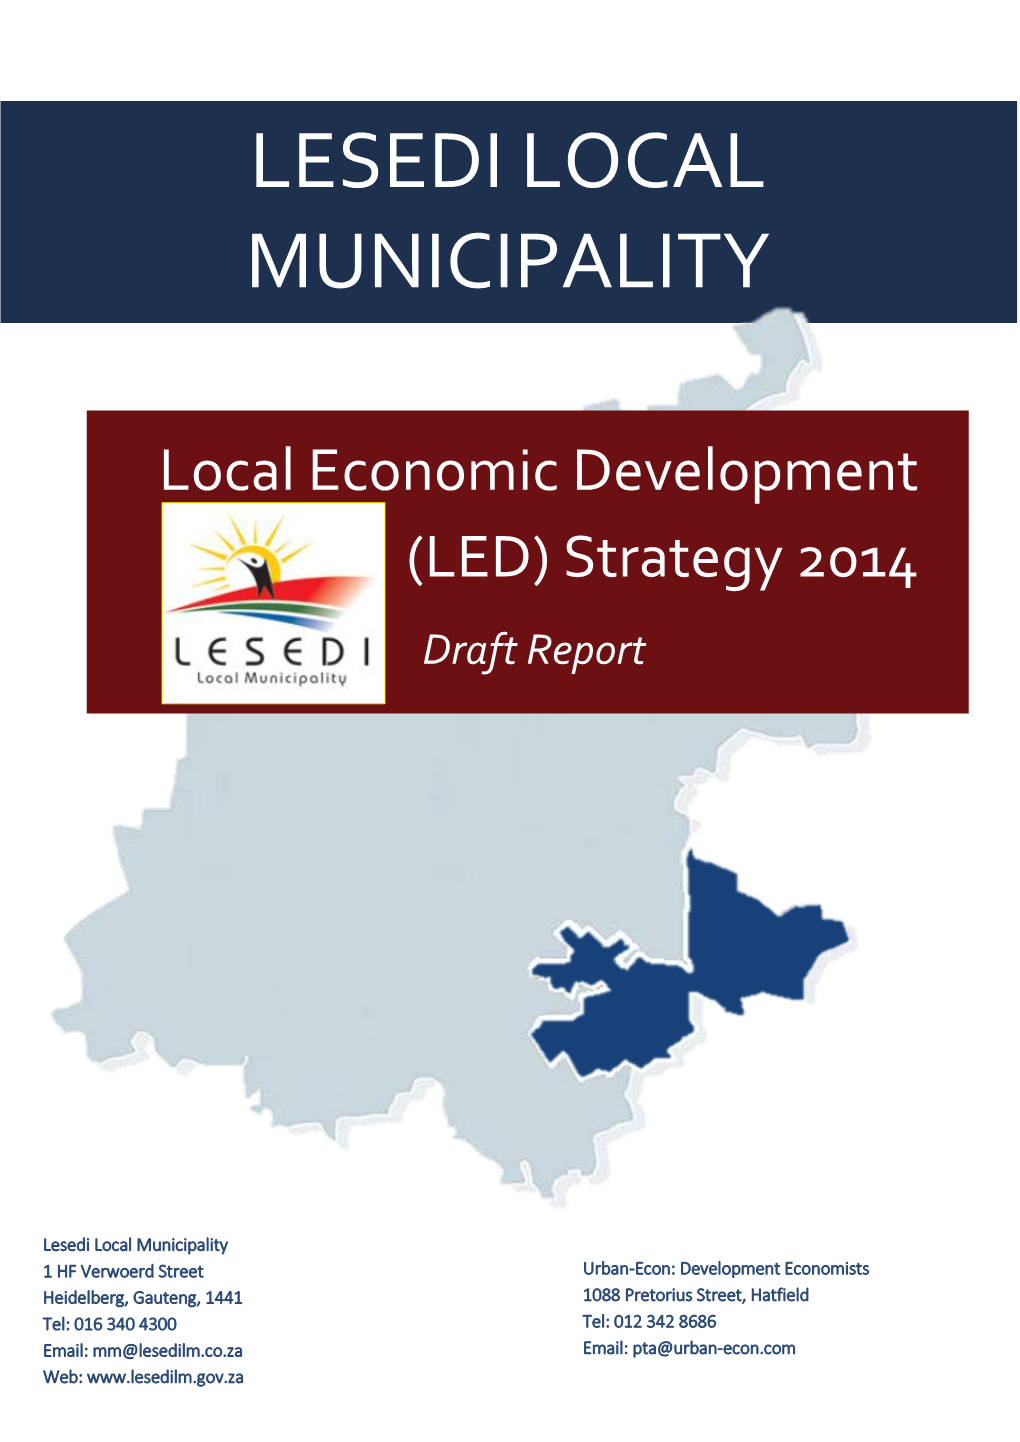 The Revised LED Strategy of the Lesedi Local Municipality